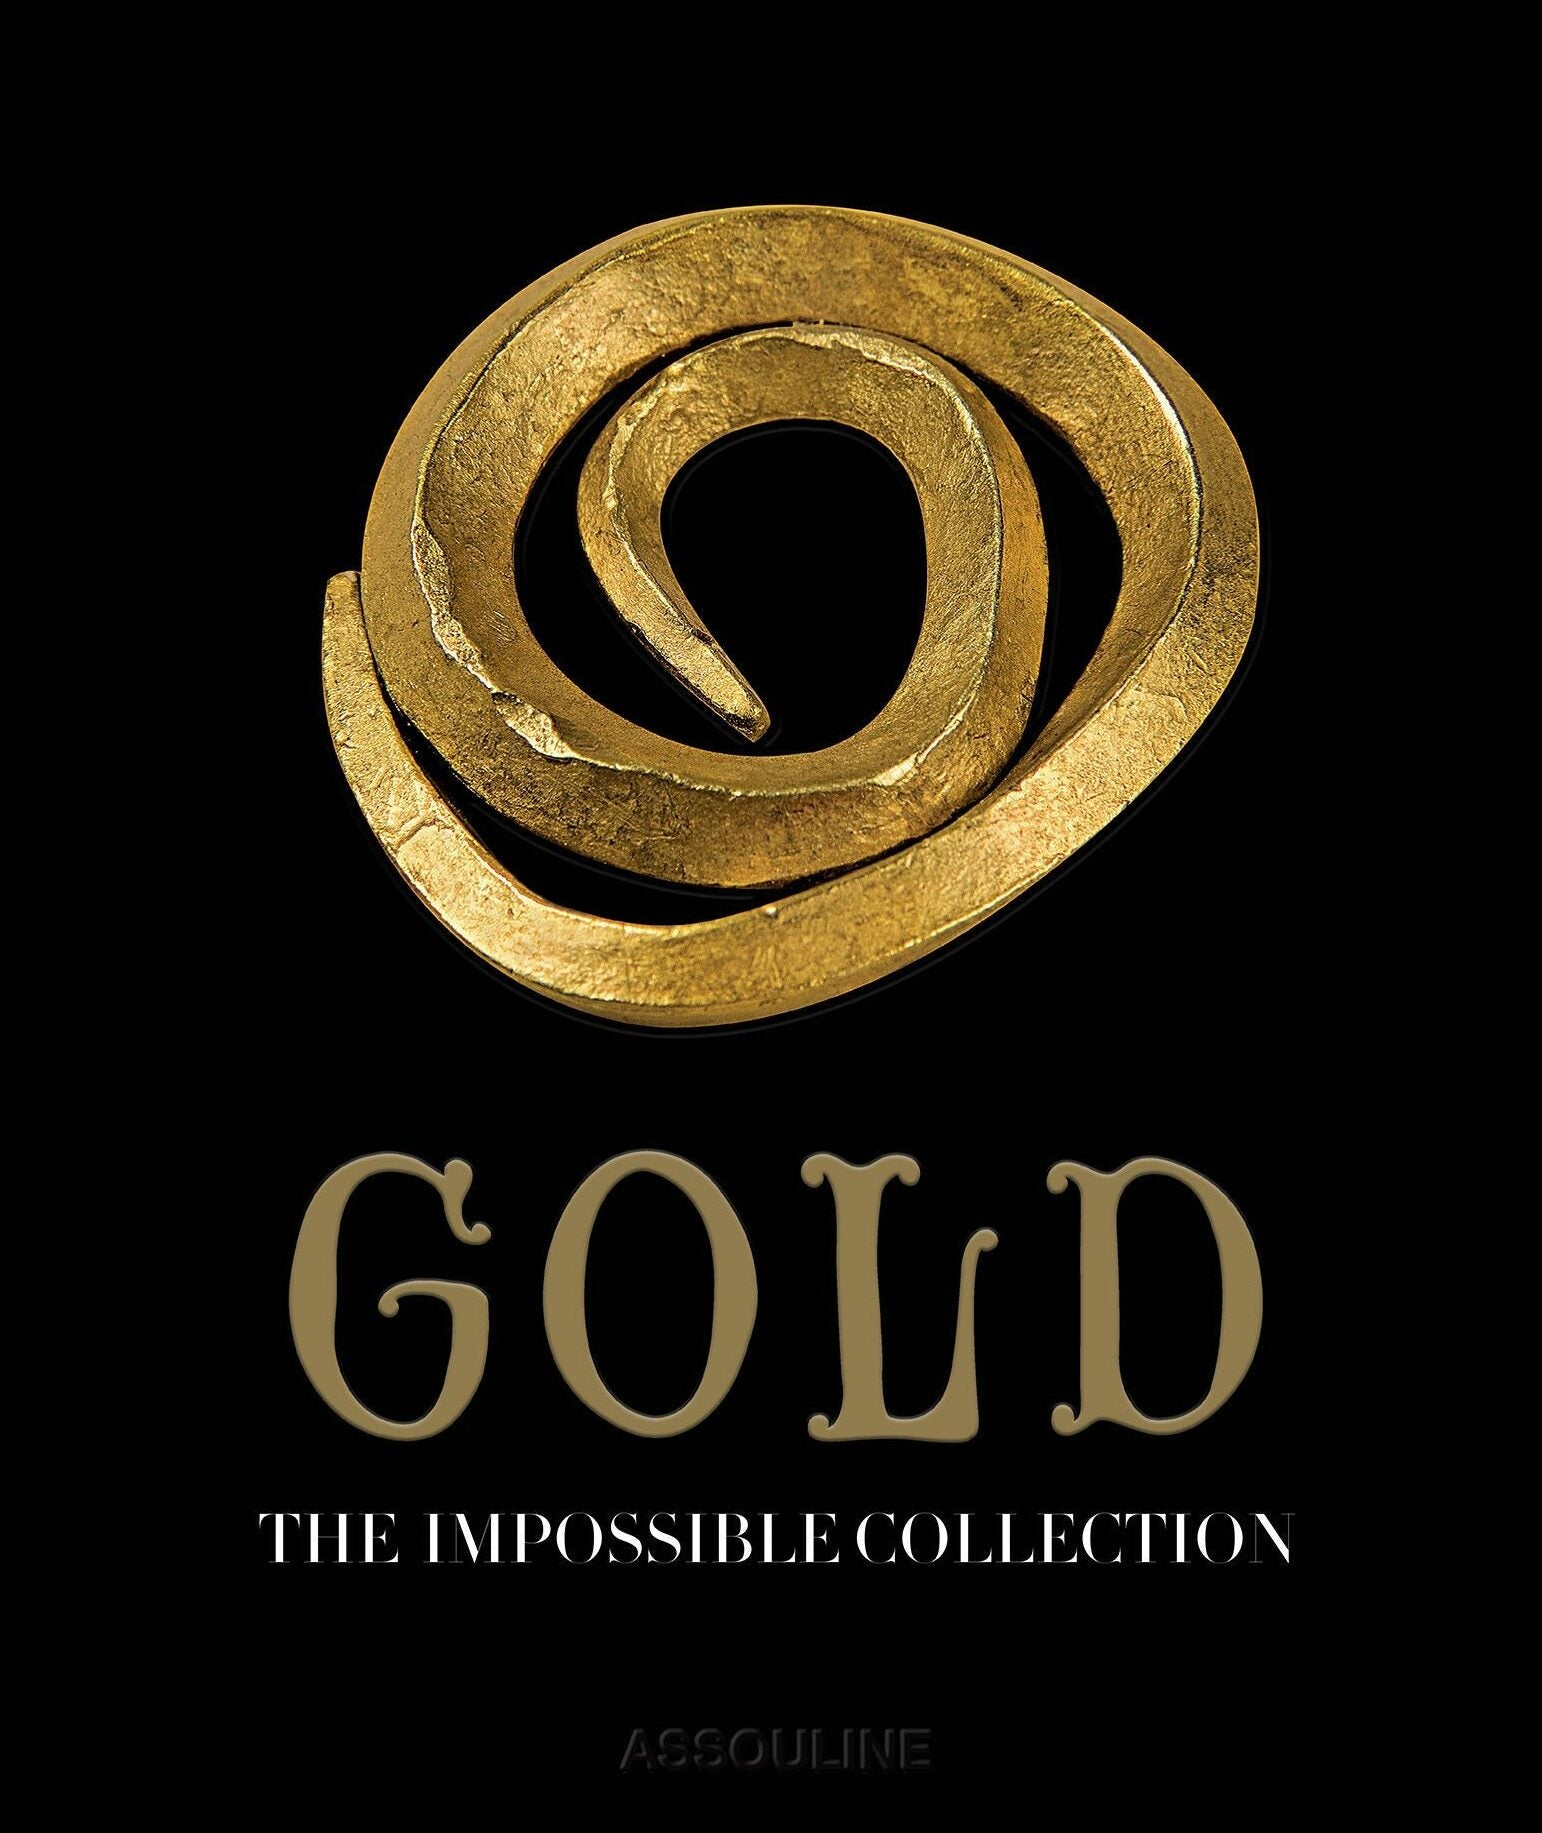 The Impossible Collection: Gold